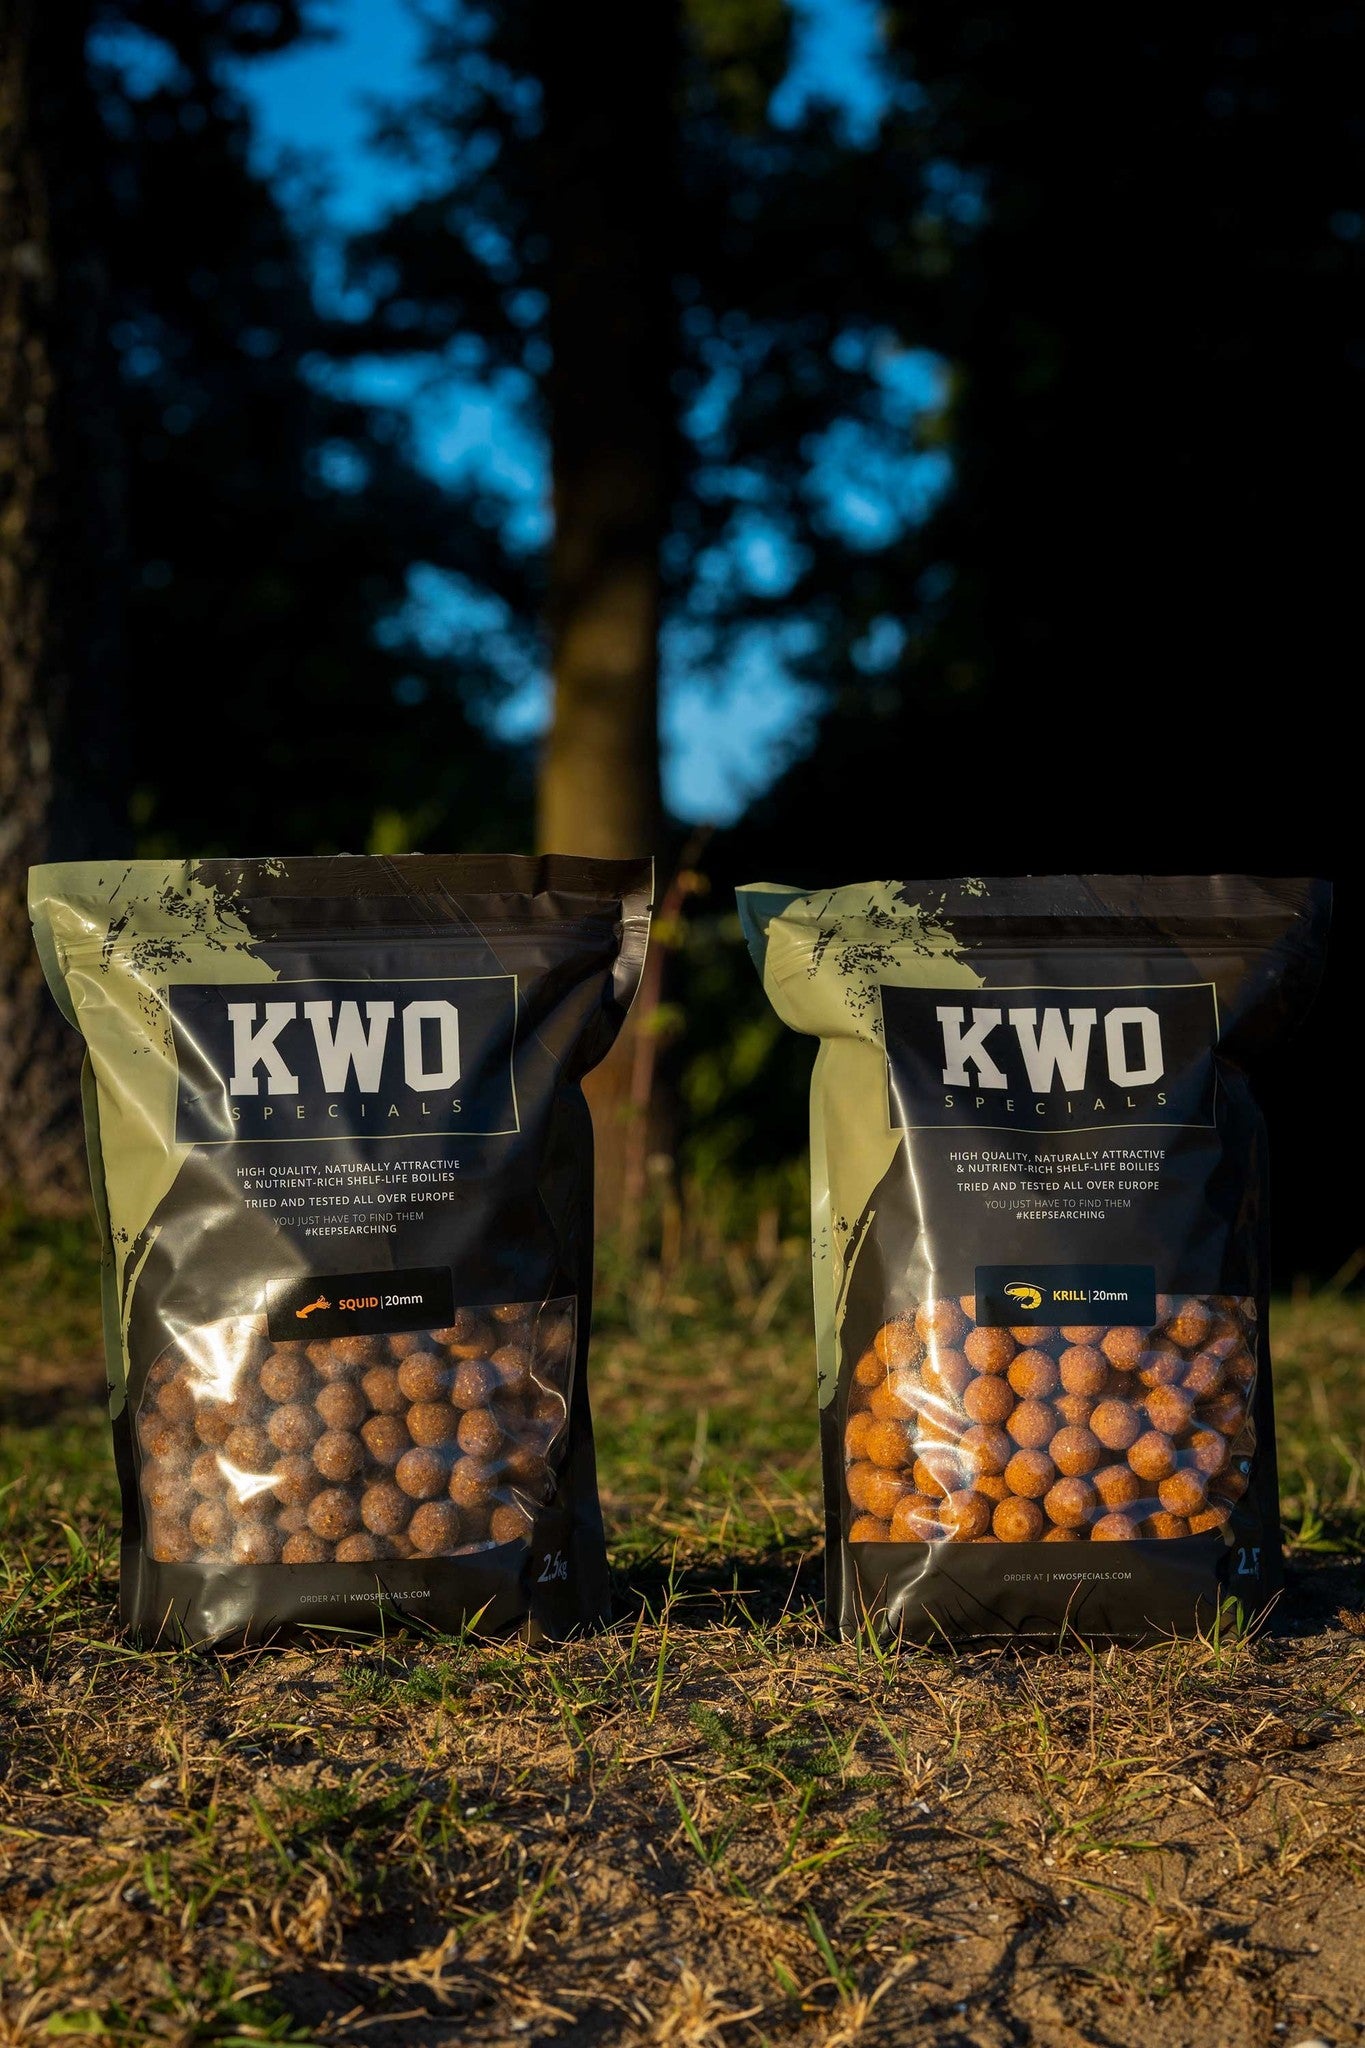 Starter Pack Mixed - 5KG KWO Specials - Boilies - KWO Shop